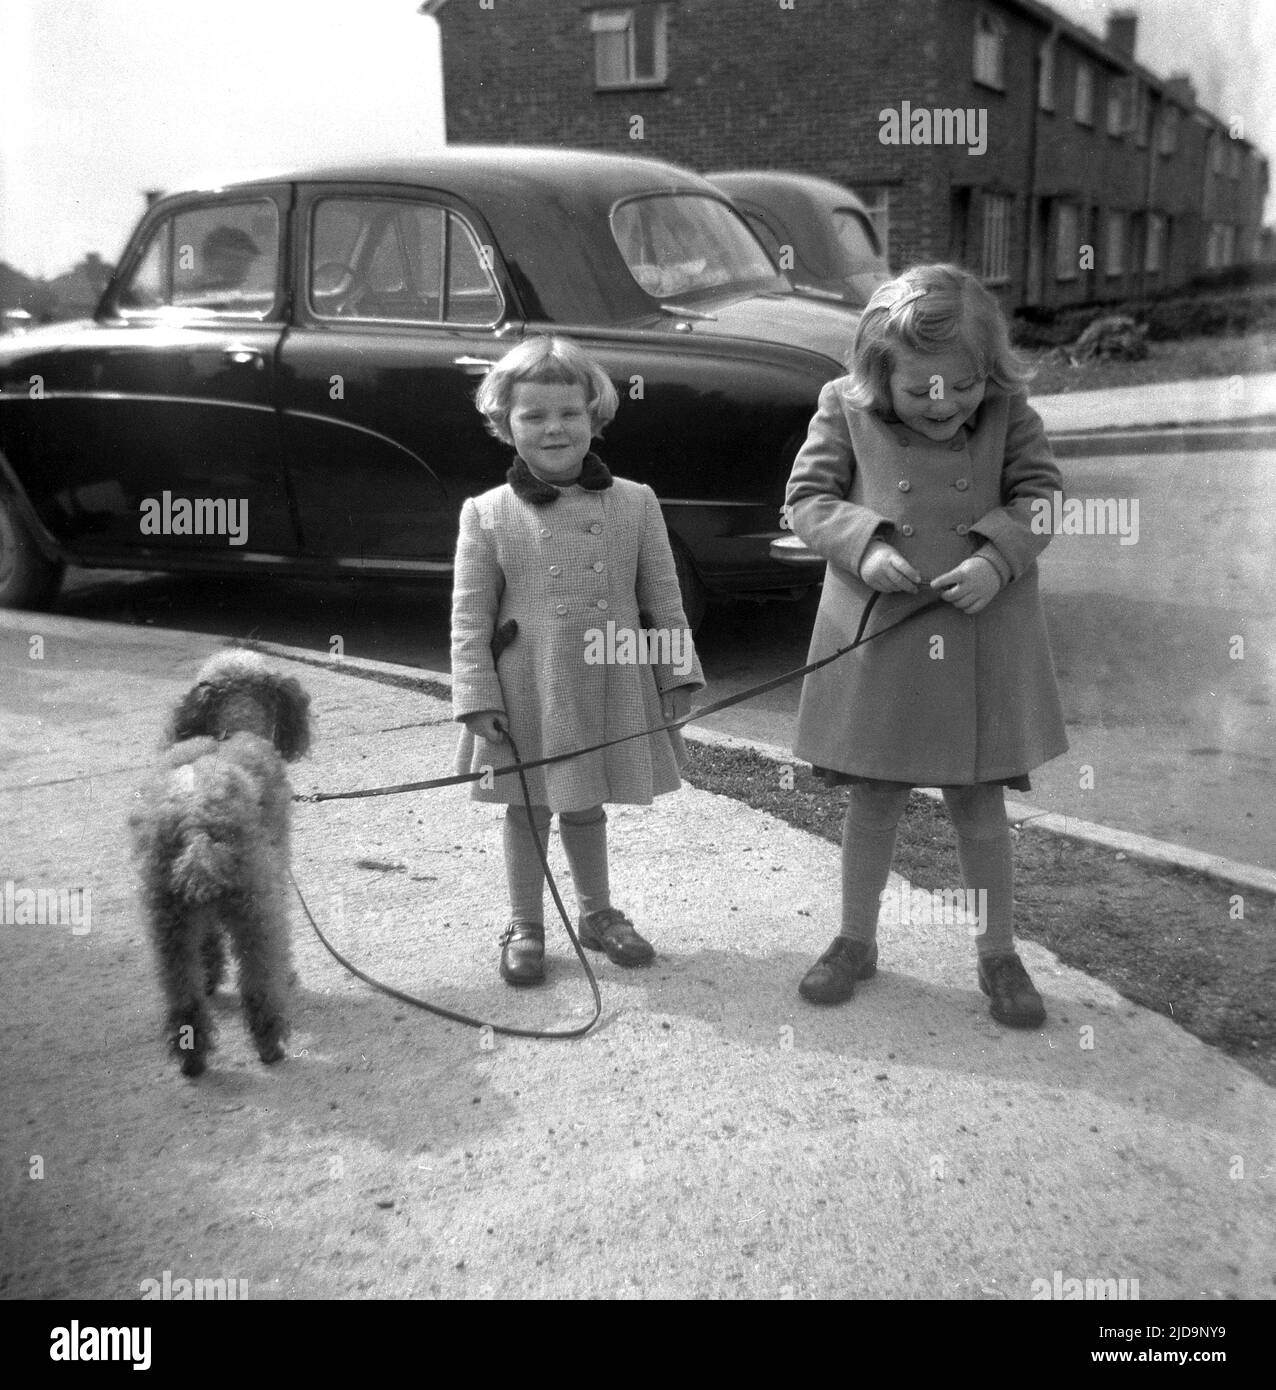 1950s, historical, outside at a housing estate beside a car of the era, two young girls, sisters, in coats, outside with their pet poddle, which has onto it a dual dog lead, which both girls are holding onto, England, UK. Stock Photo